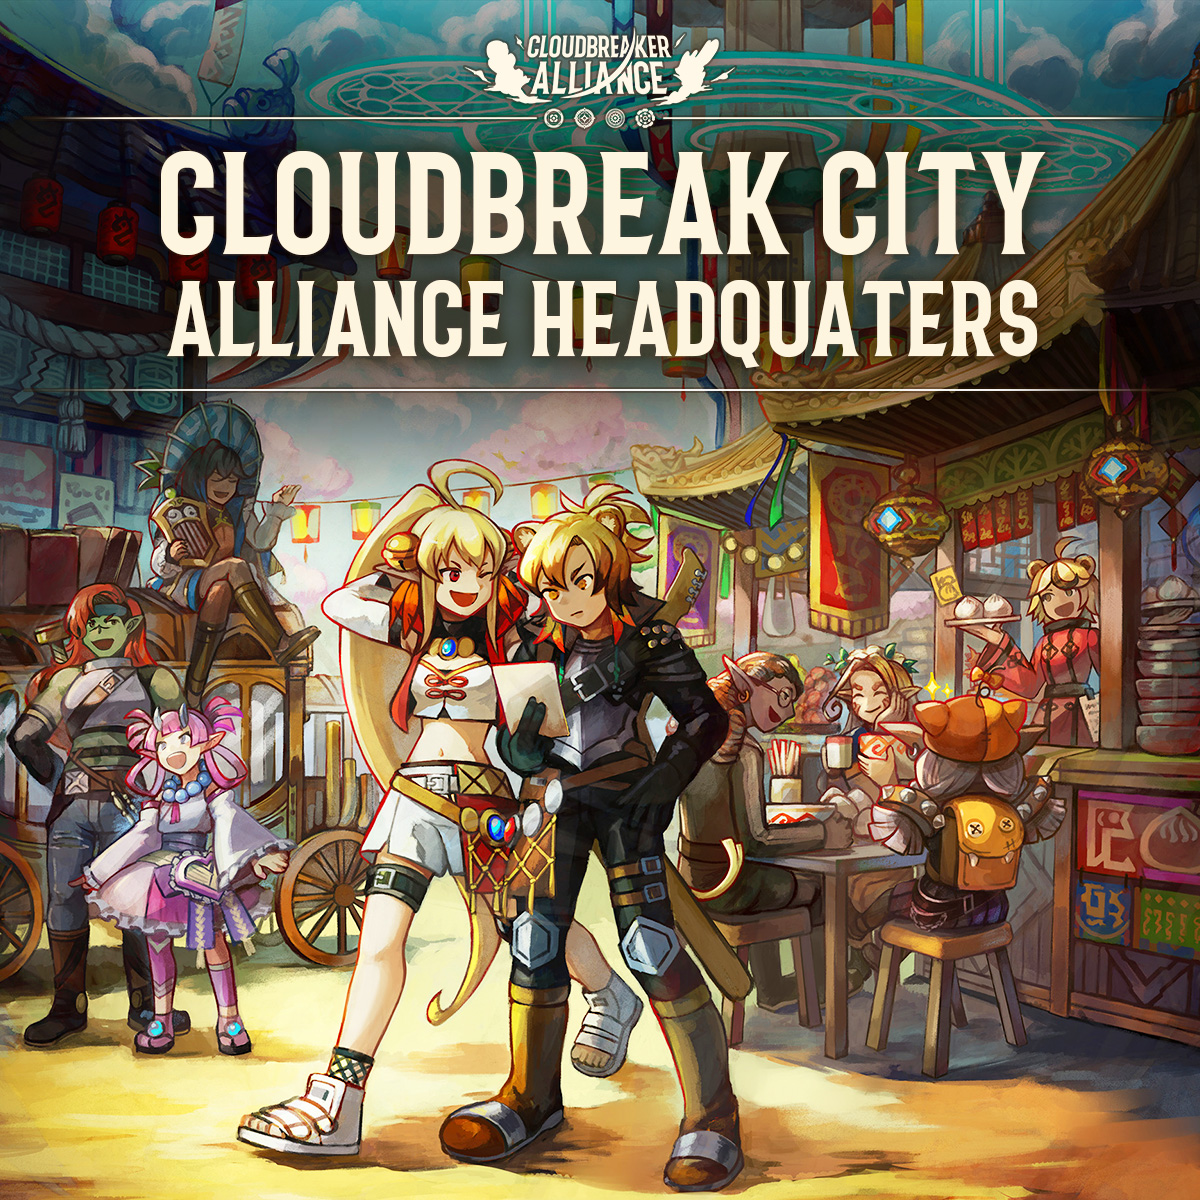 Cloudbreak City, the alliance's headquarters, was originally founded by the Nailbuckets, an Ulrukian merchant band comprised mostly of goblins.
Being highly tolerant to risk, only the goblins are crazy enough to set up a bolt & nail shop in the middle of newly cloudbroken land.